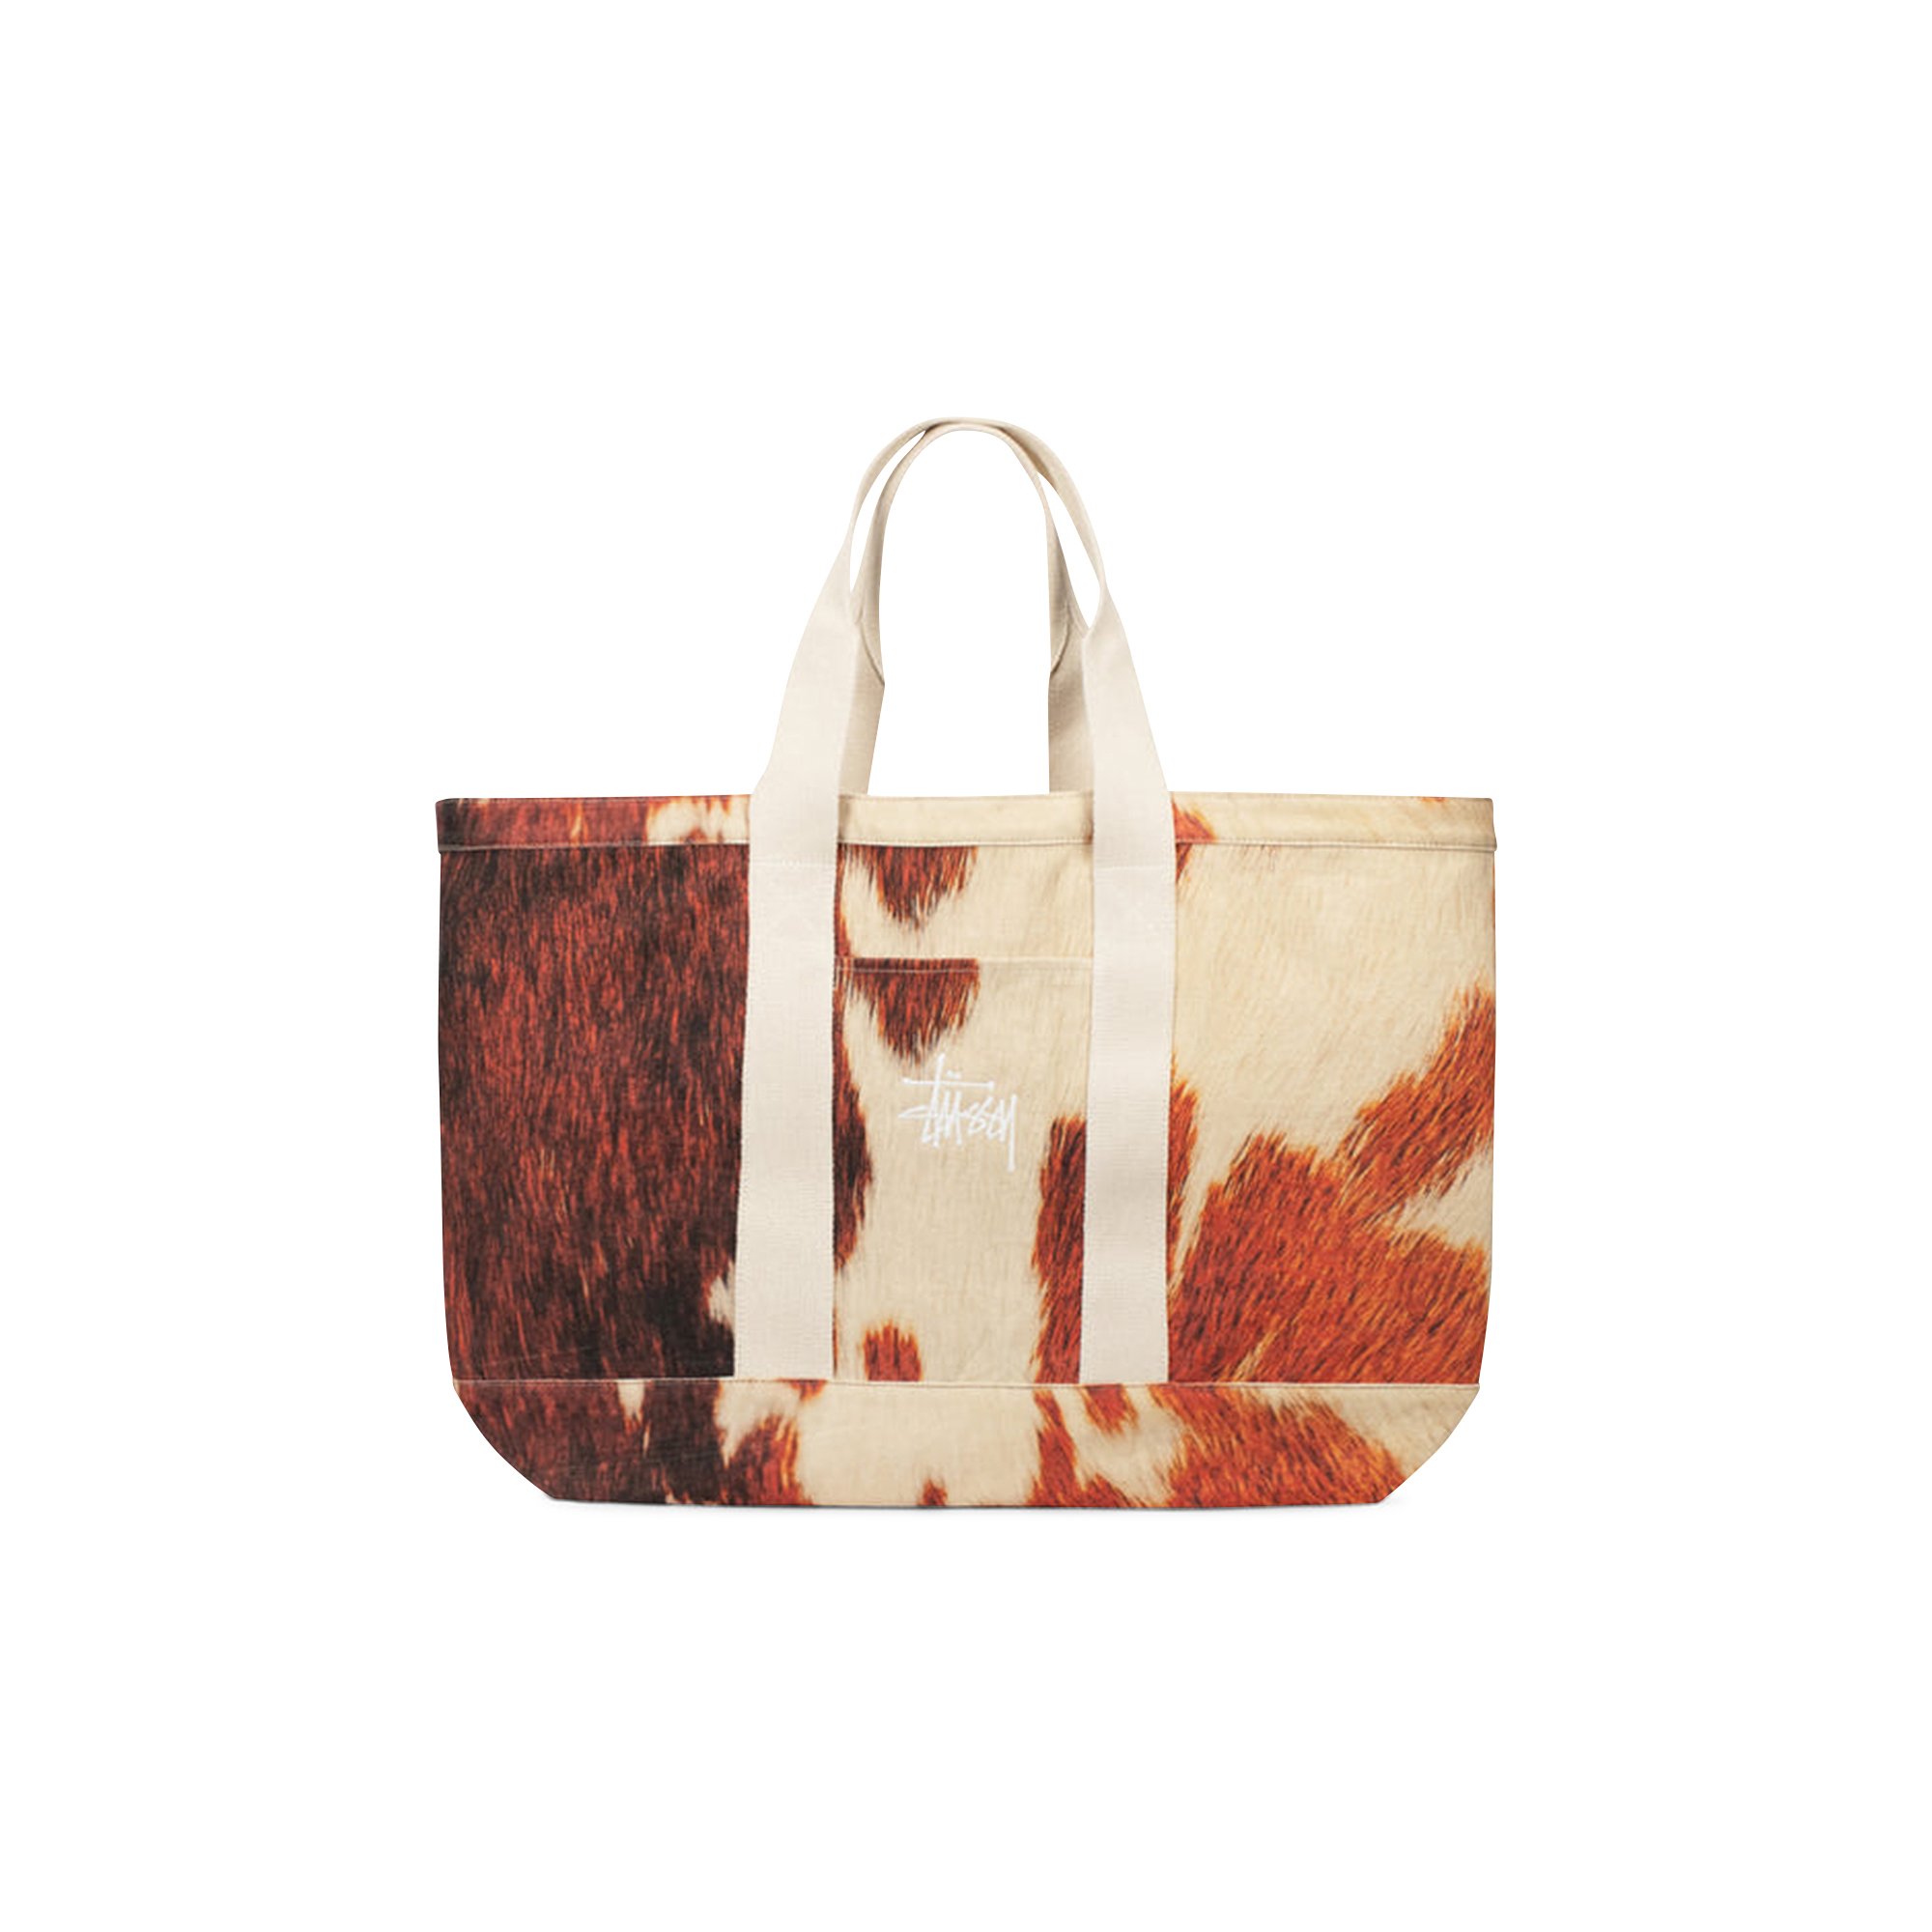 Buy Stussy Canvas Extra Large Tote Bag 'Cowhide' - 134253 COWH | GOAT